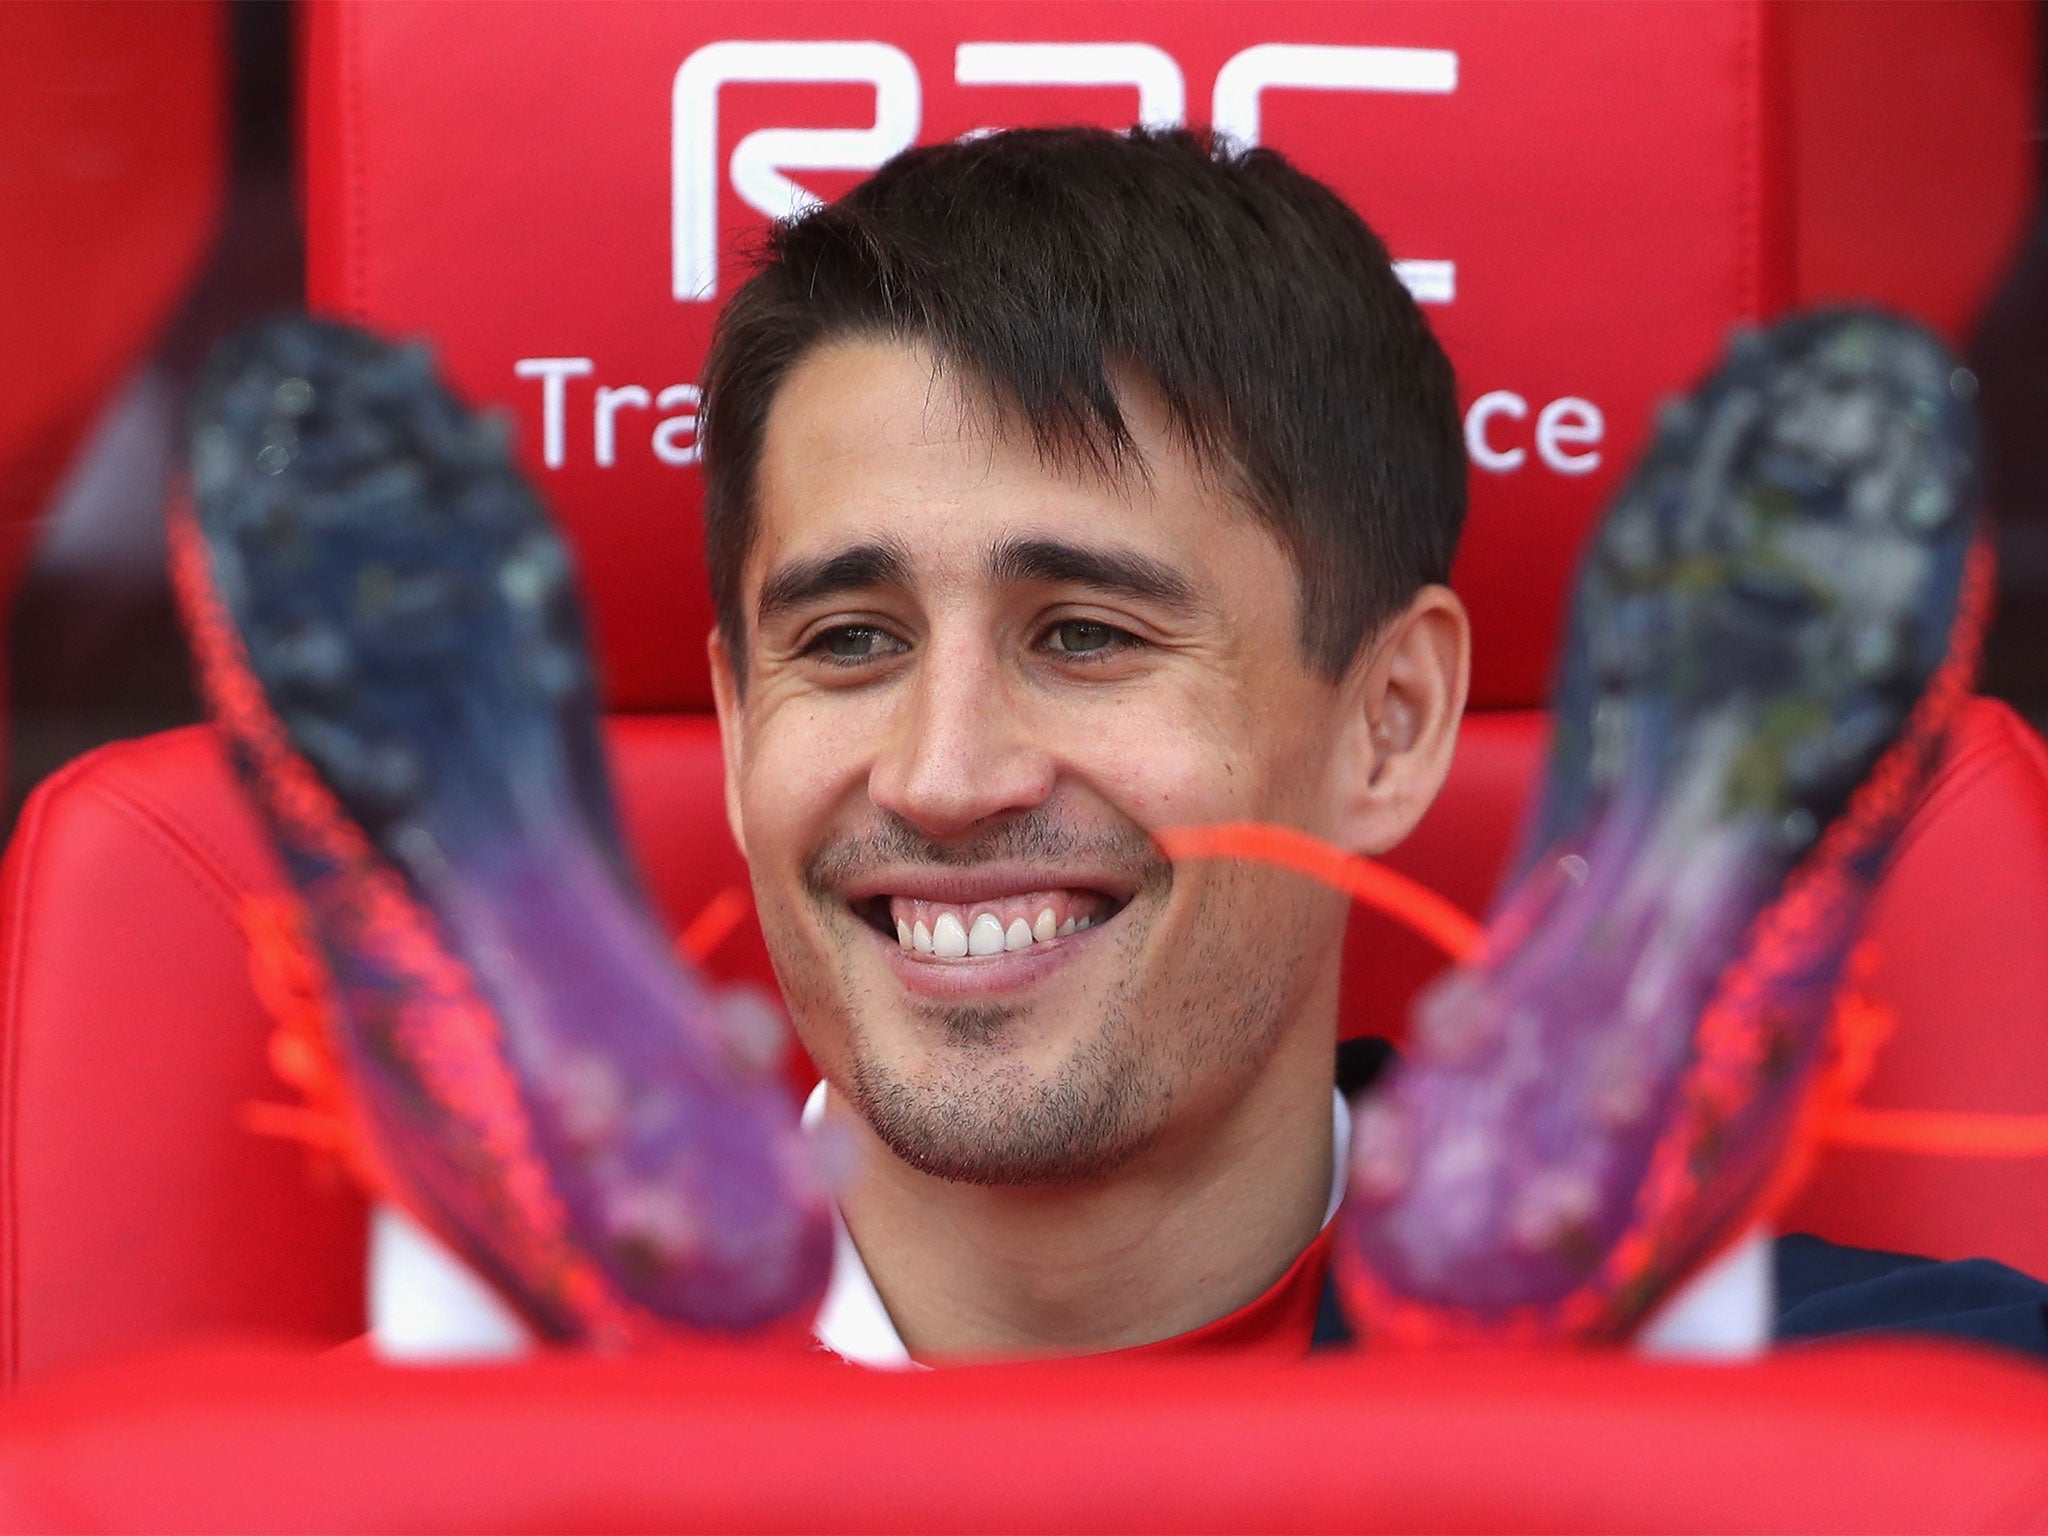 "I'm relaxed about my future," says Bojan, who returns to Stoke for talks this week